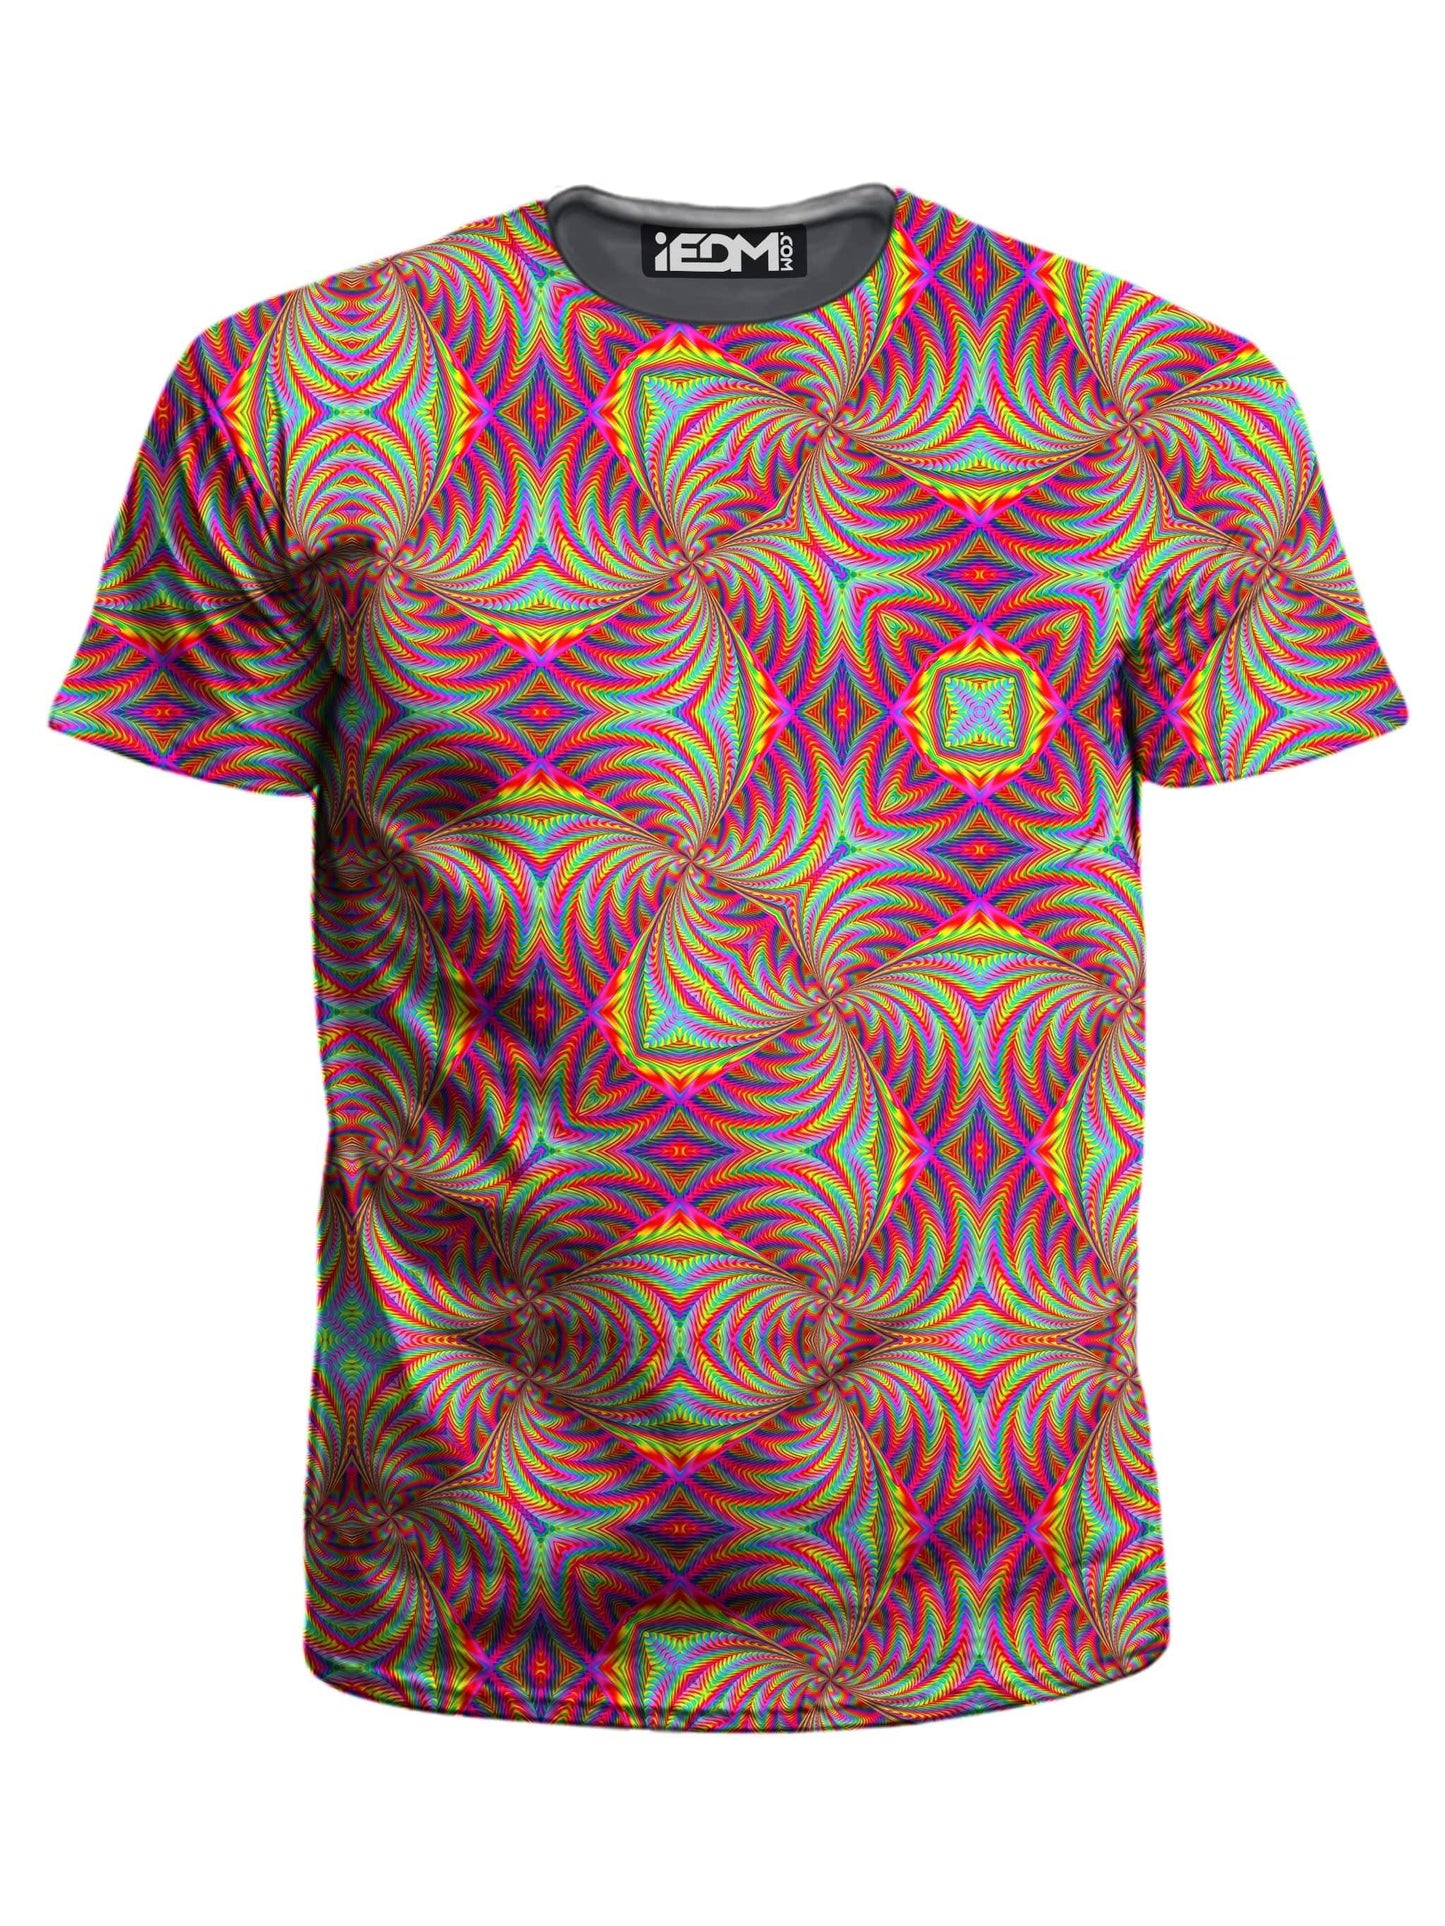 All The Faves T-Shirt and Shorts Combo, Art Design Works, | iEDM